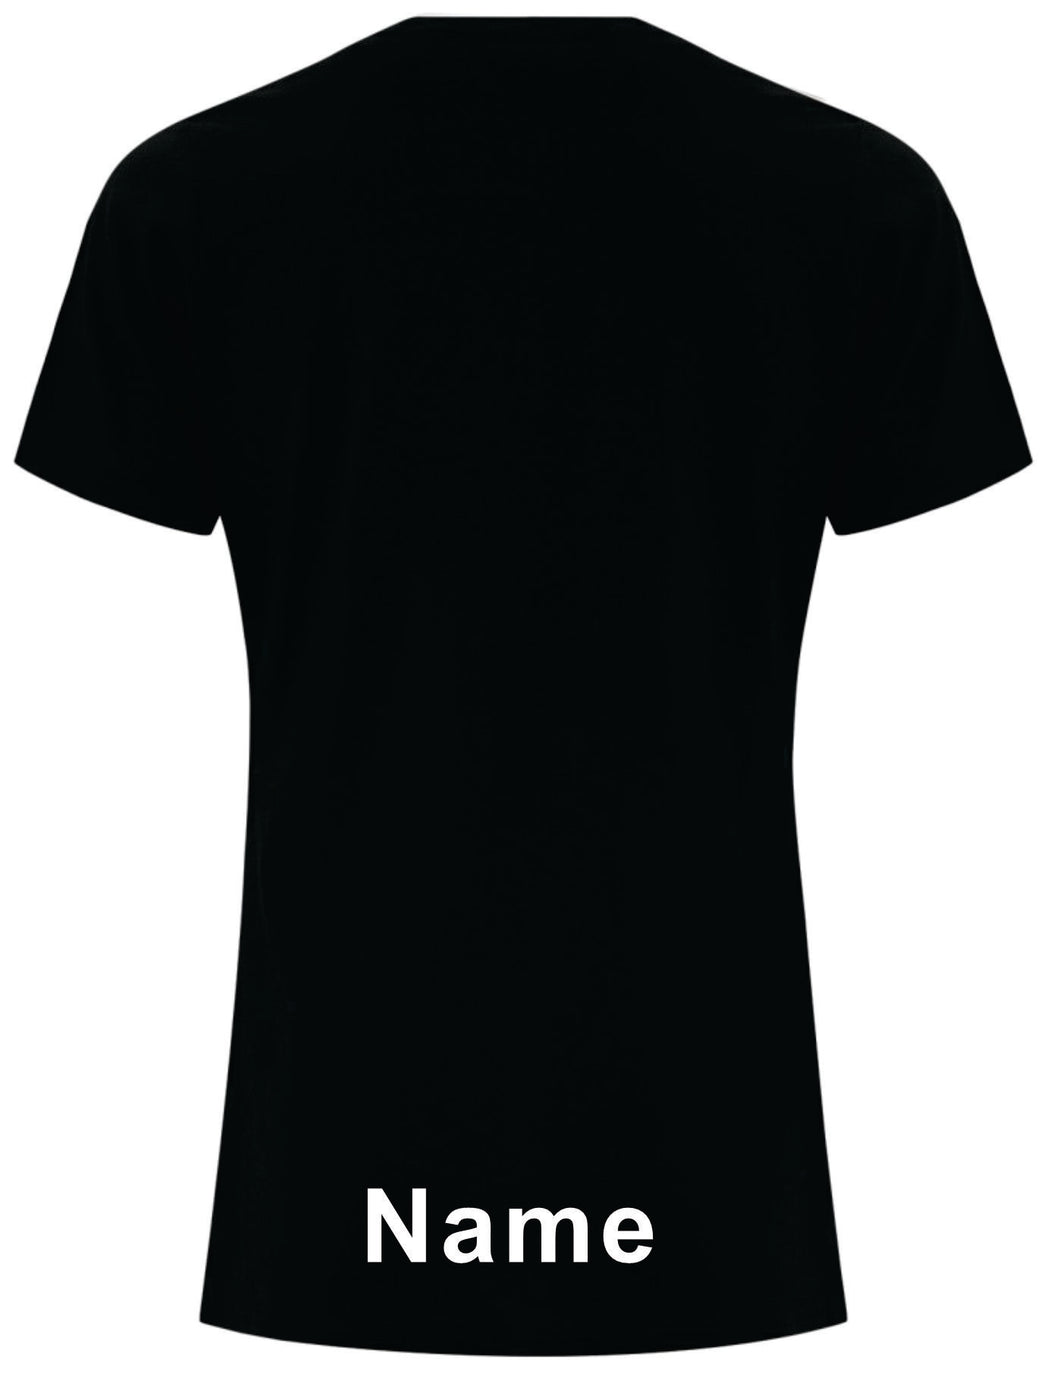 ATC™ EVERYDAY COTTON LADIES TEE. ATC1000L WITH NAME ON BOTTOM BACK